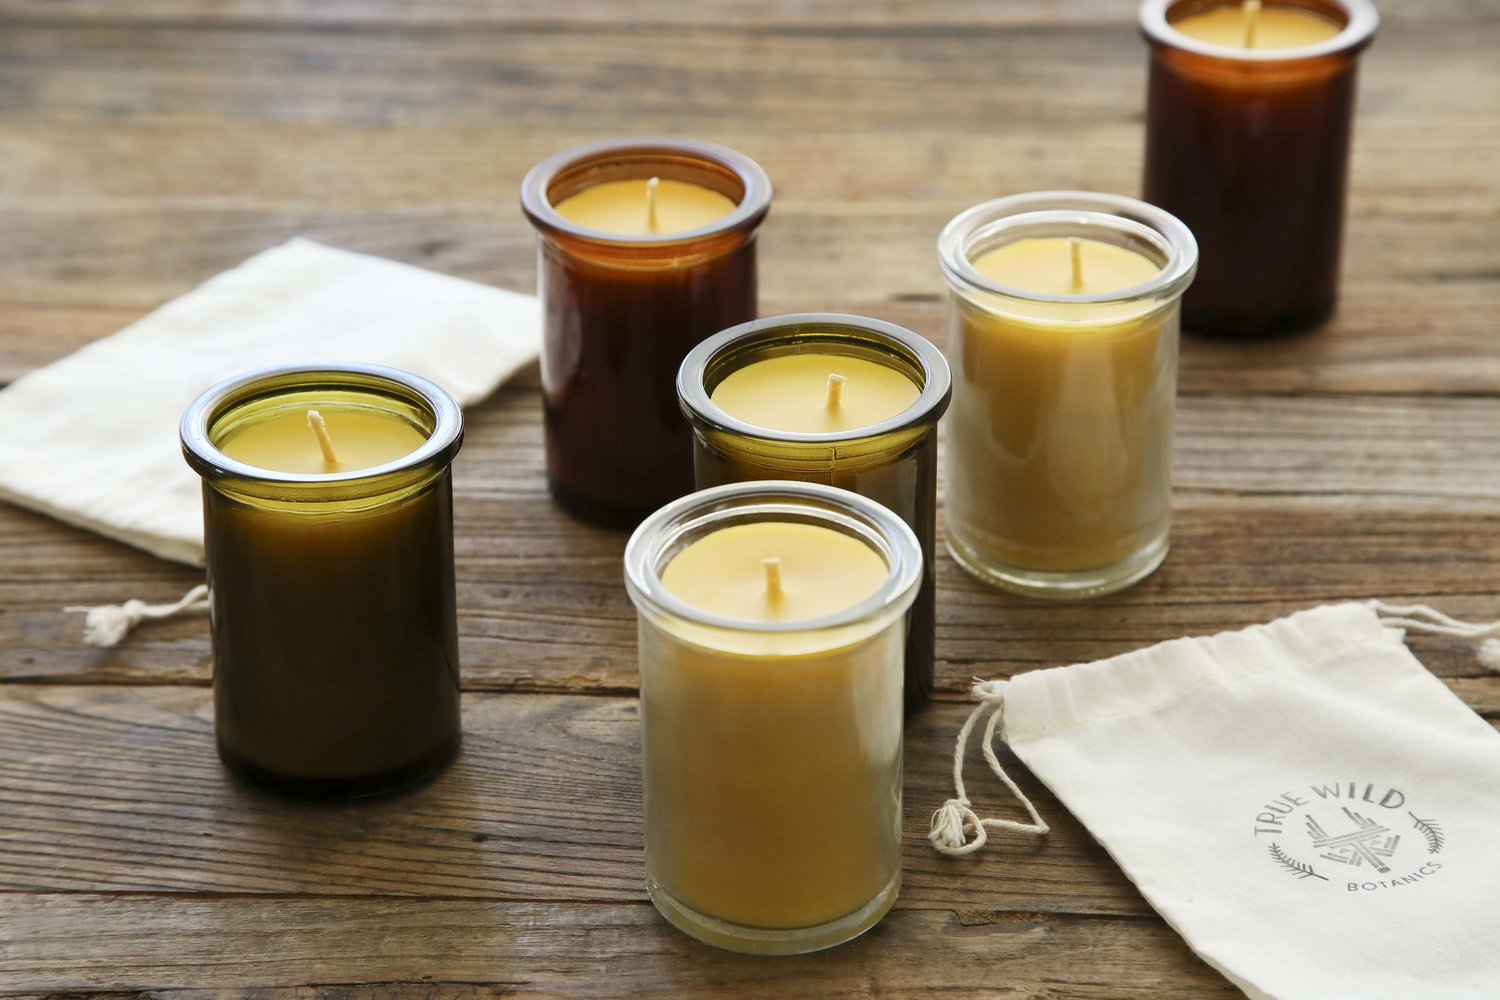 Pure Beeswax - Heavy Glass Candle - 8.5 oz - Clearance in 2023